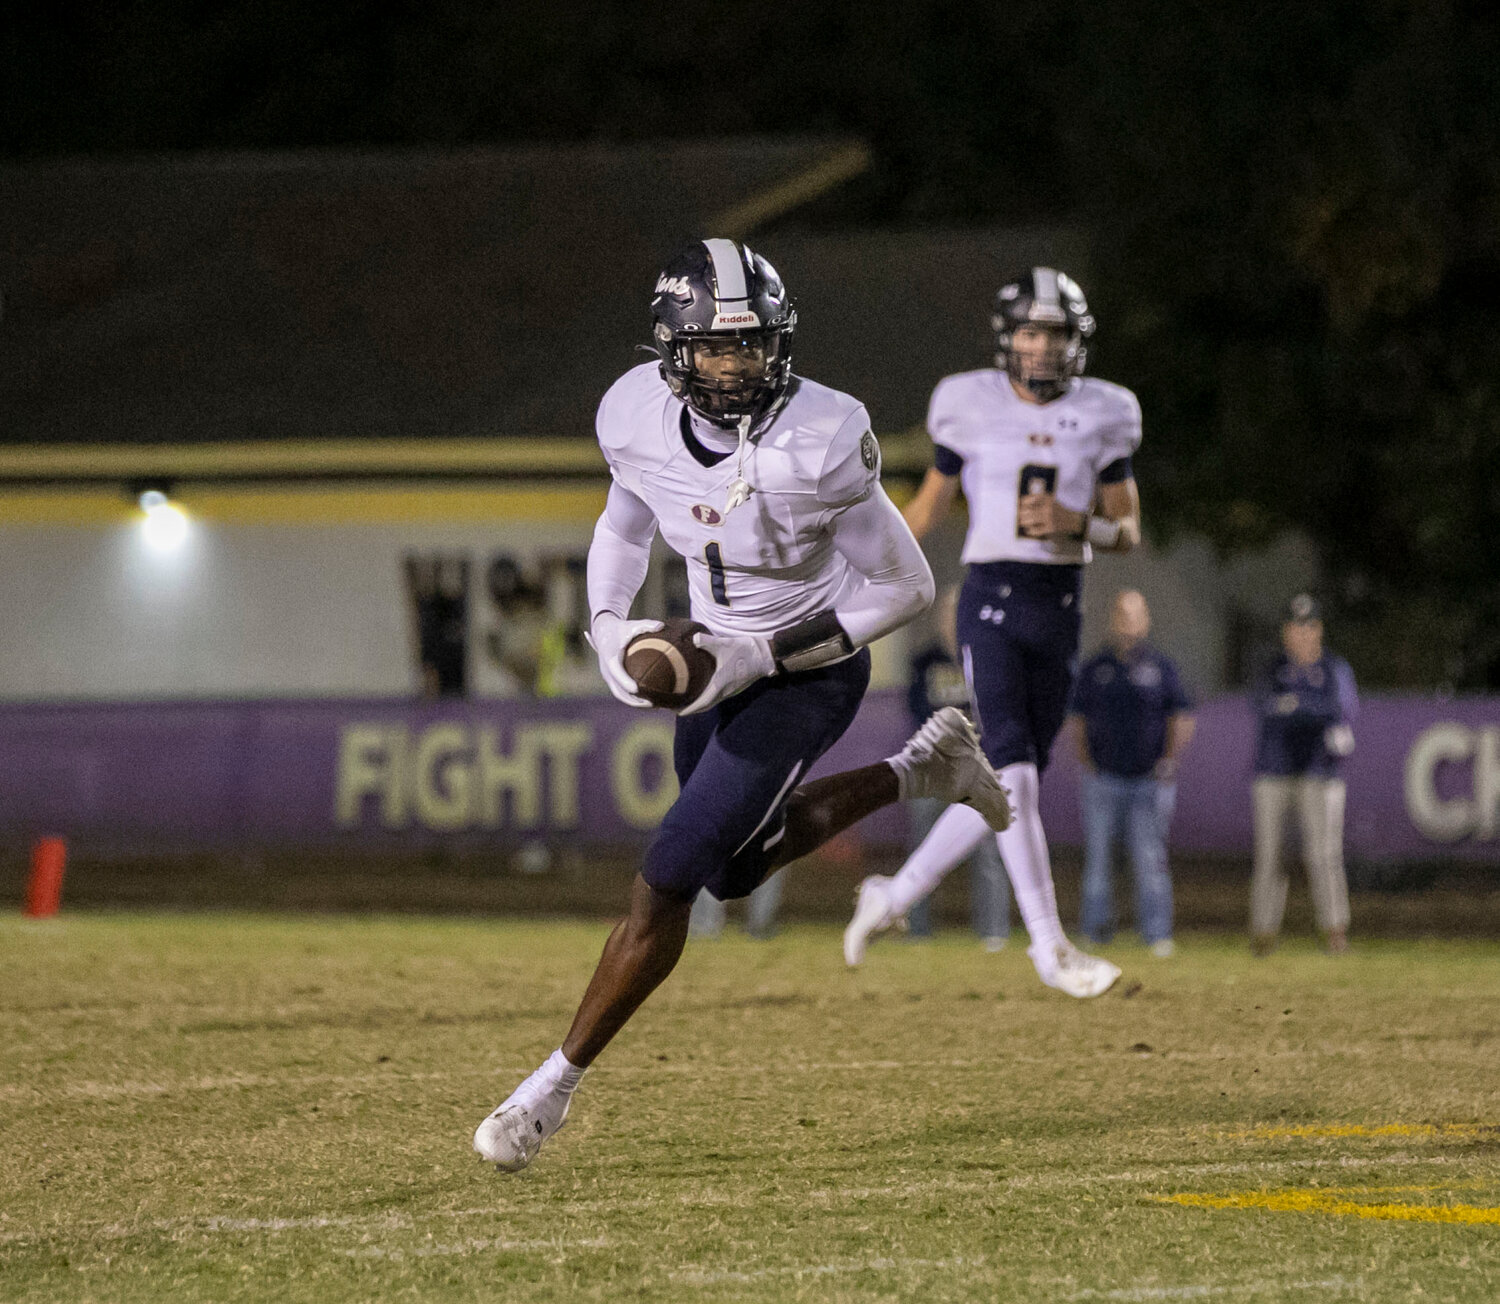 Perry Thompson secures a catch on a screen pass during the first half of action between the Foley Lions and Daphne Trojans at Jubilee Stadium on Friday, Oct. 27. The Auburn commit recorded a 50-yard touchdown catch where he outraced everyone the final 30 yards.